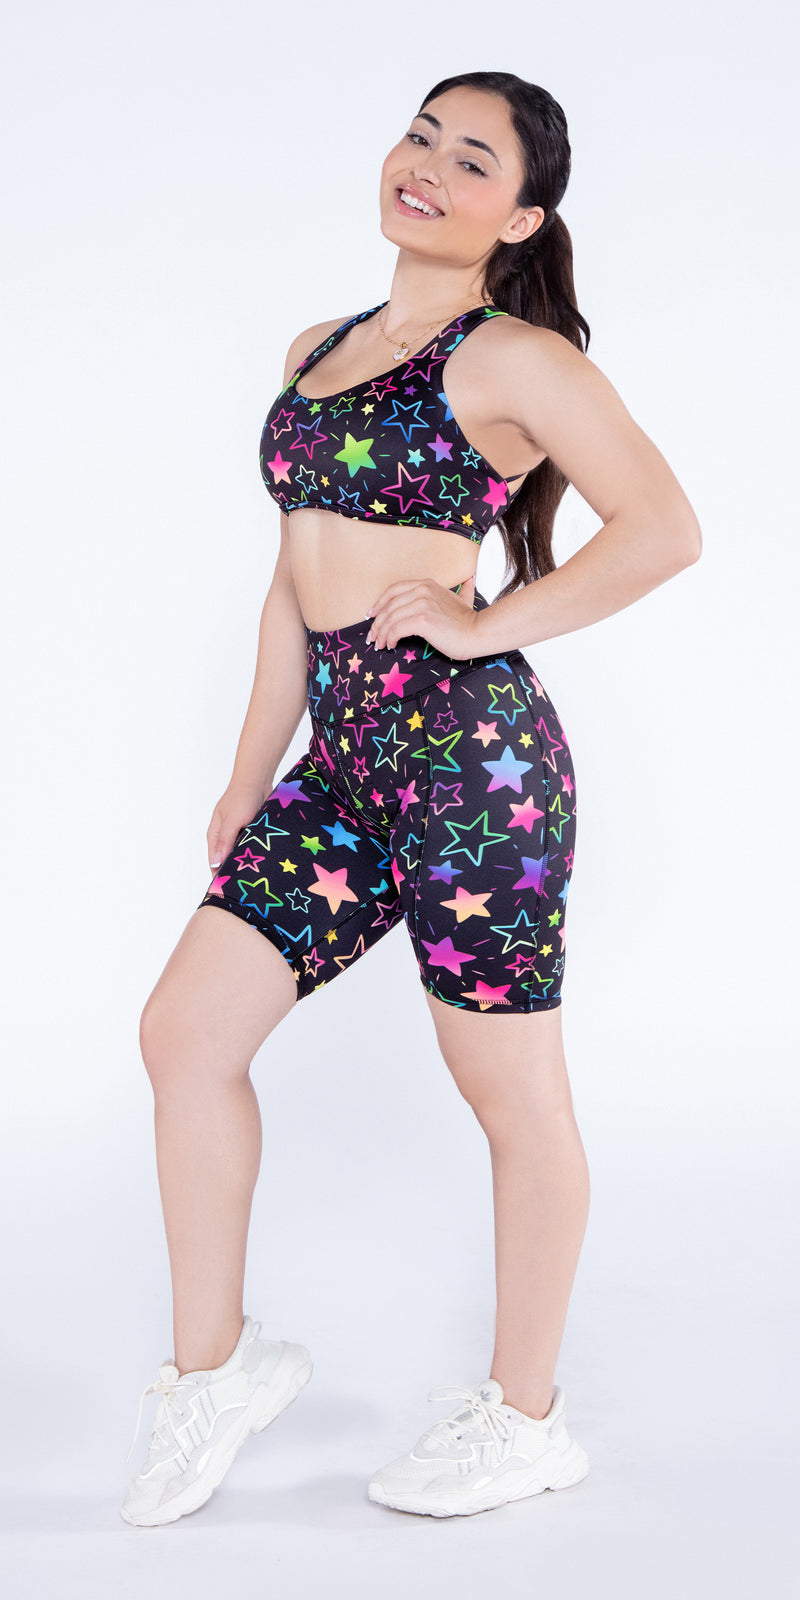 Rainbow Stars - MPX Padded Cycling Bottoms